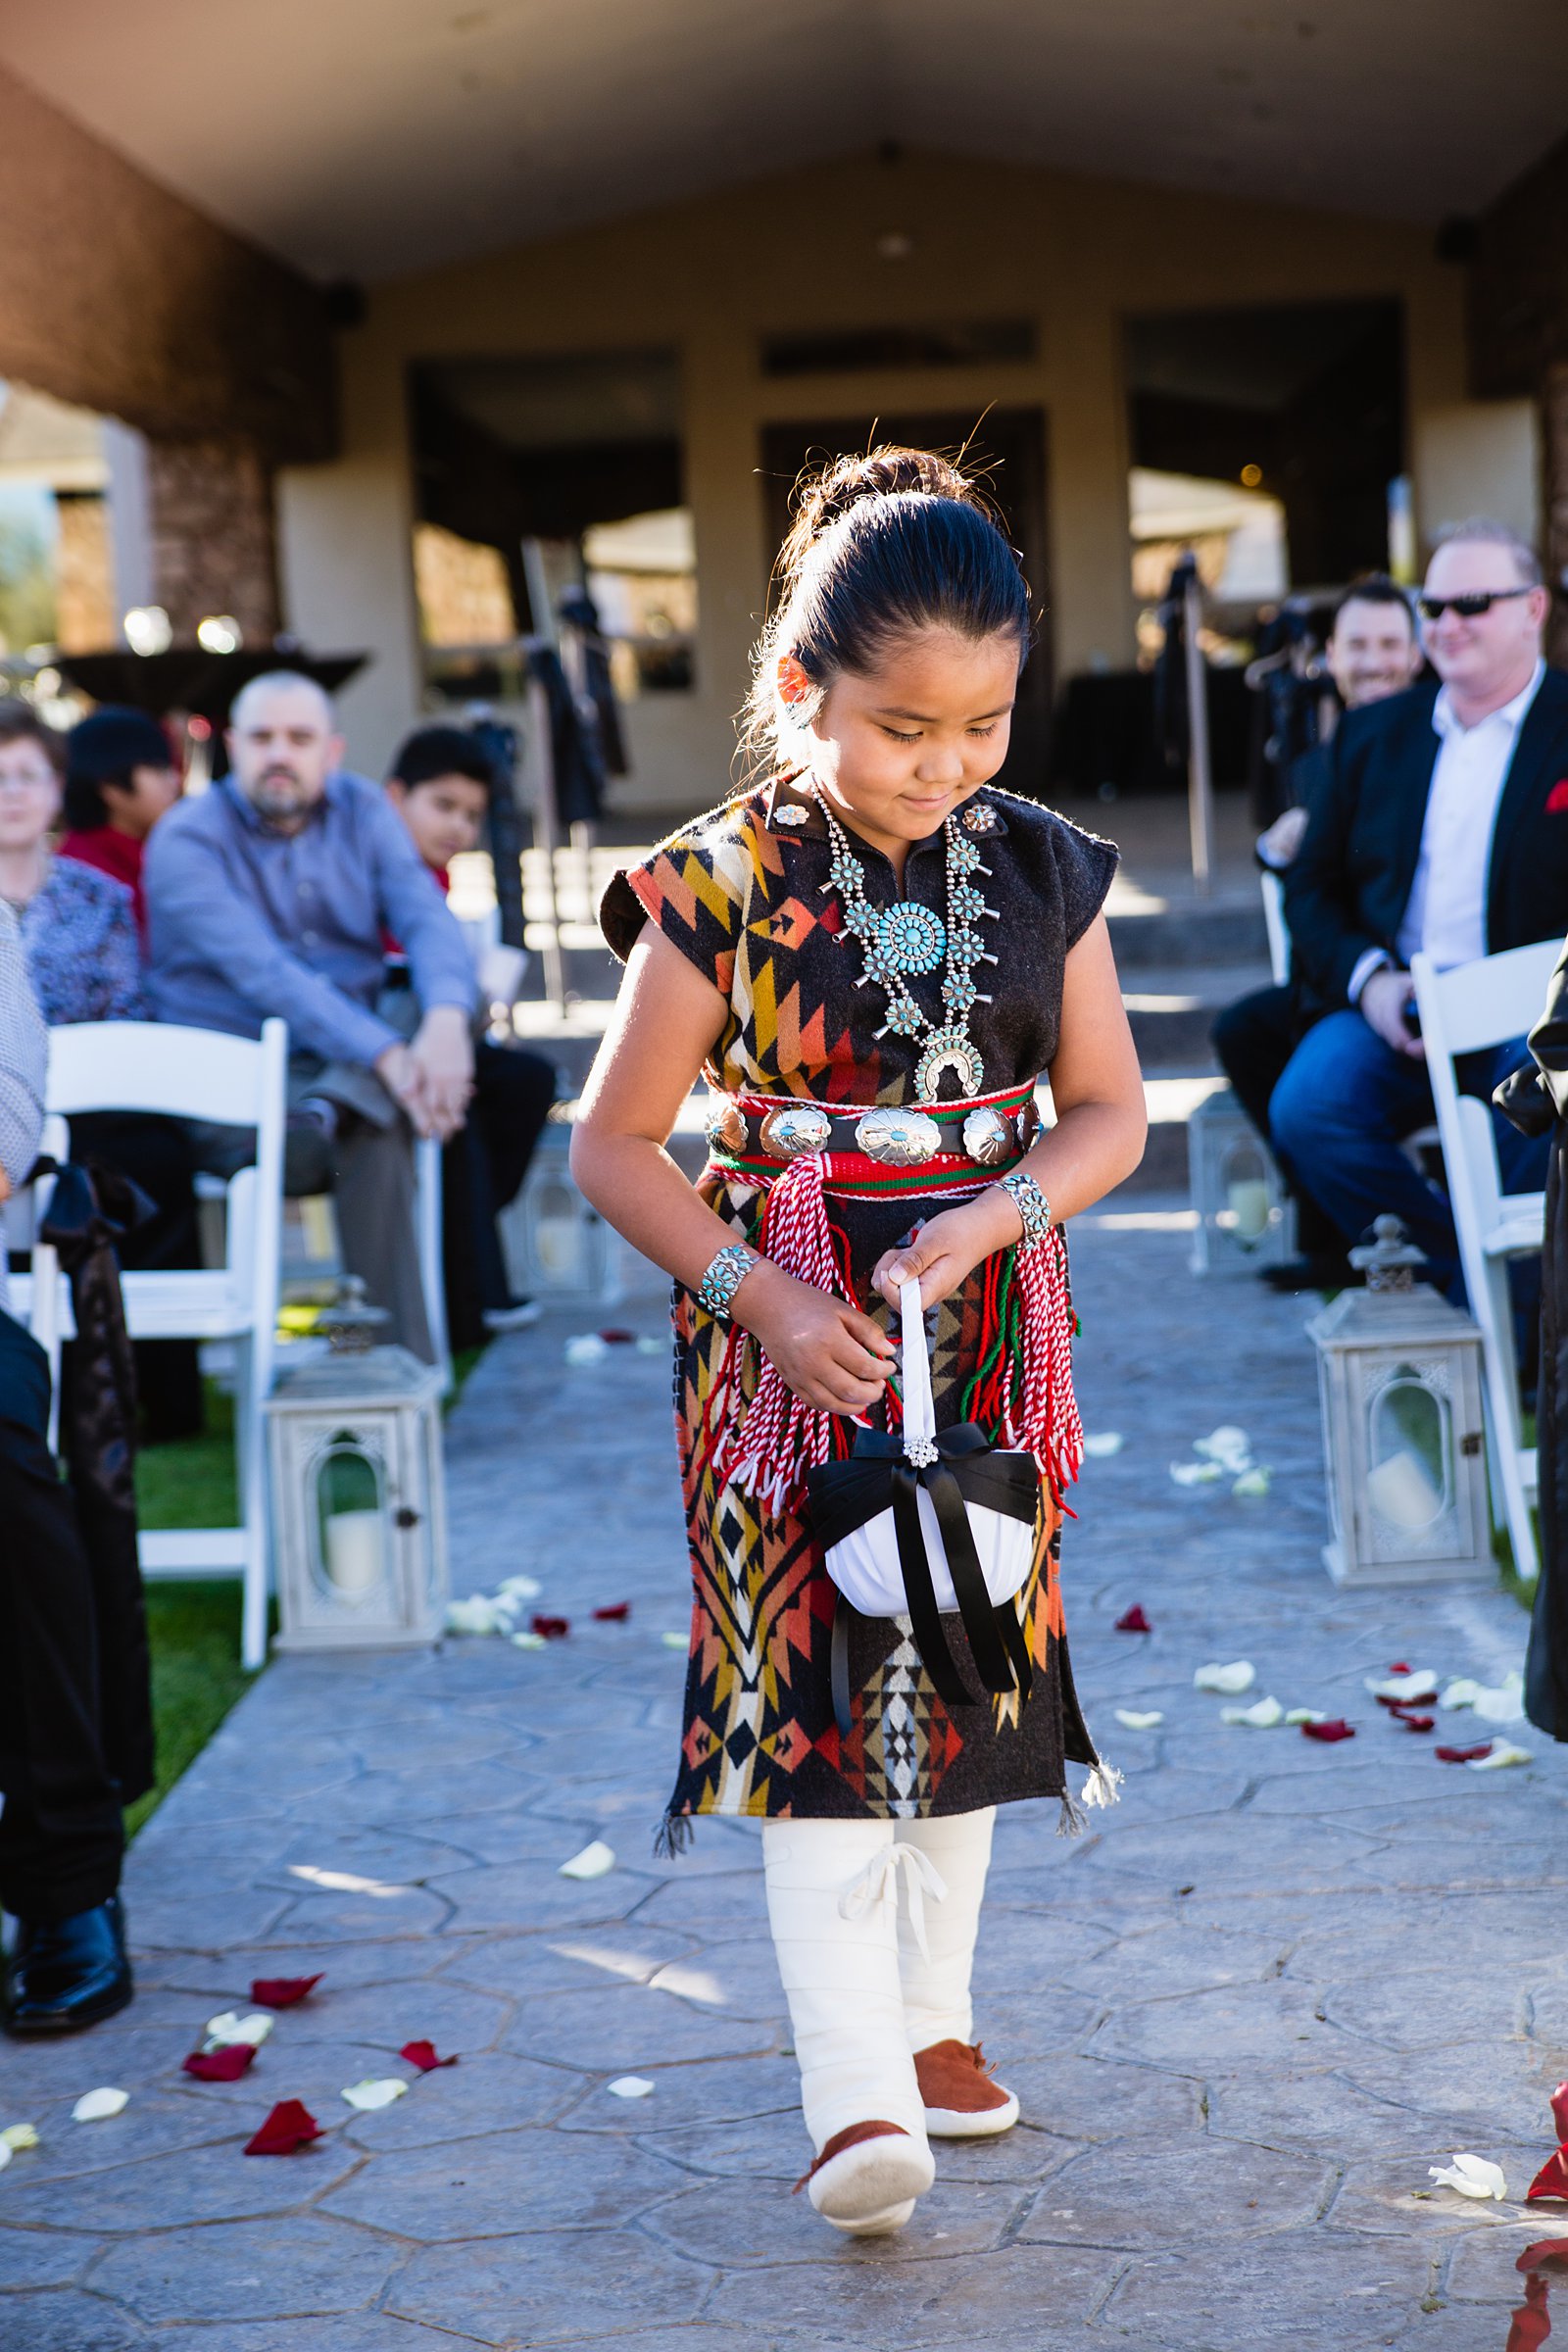 Flower girl in native outfit spreading pedals down the aisle by Arizona wedding photographer PMA Photography.